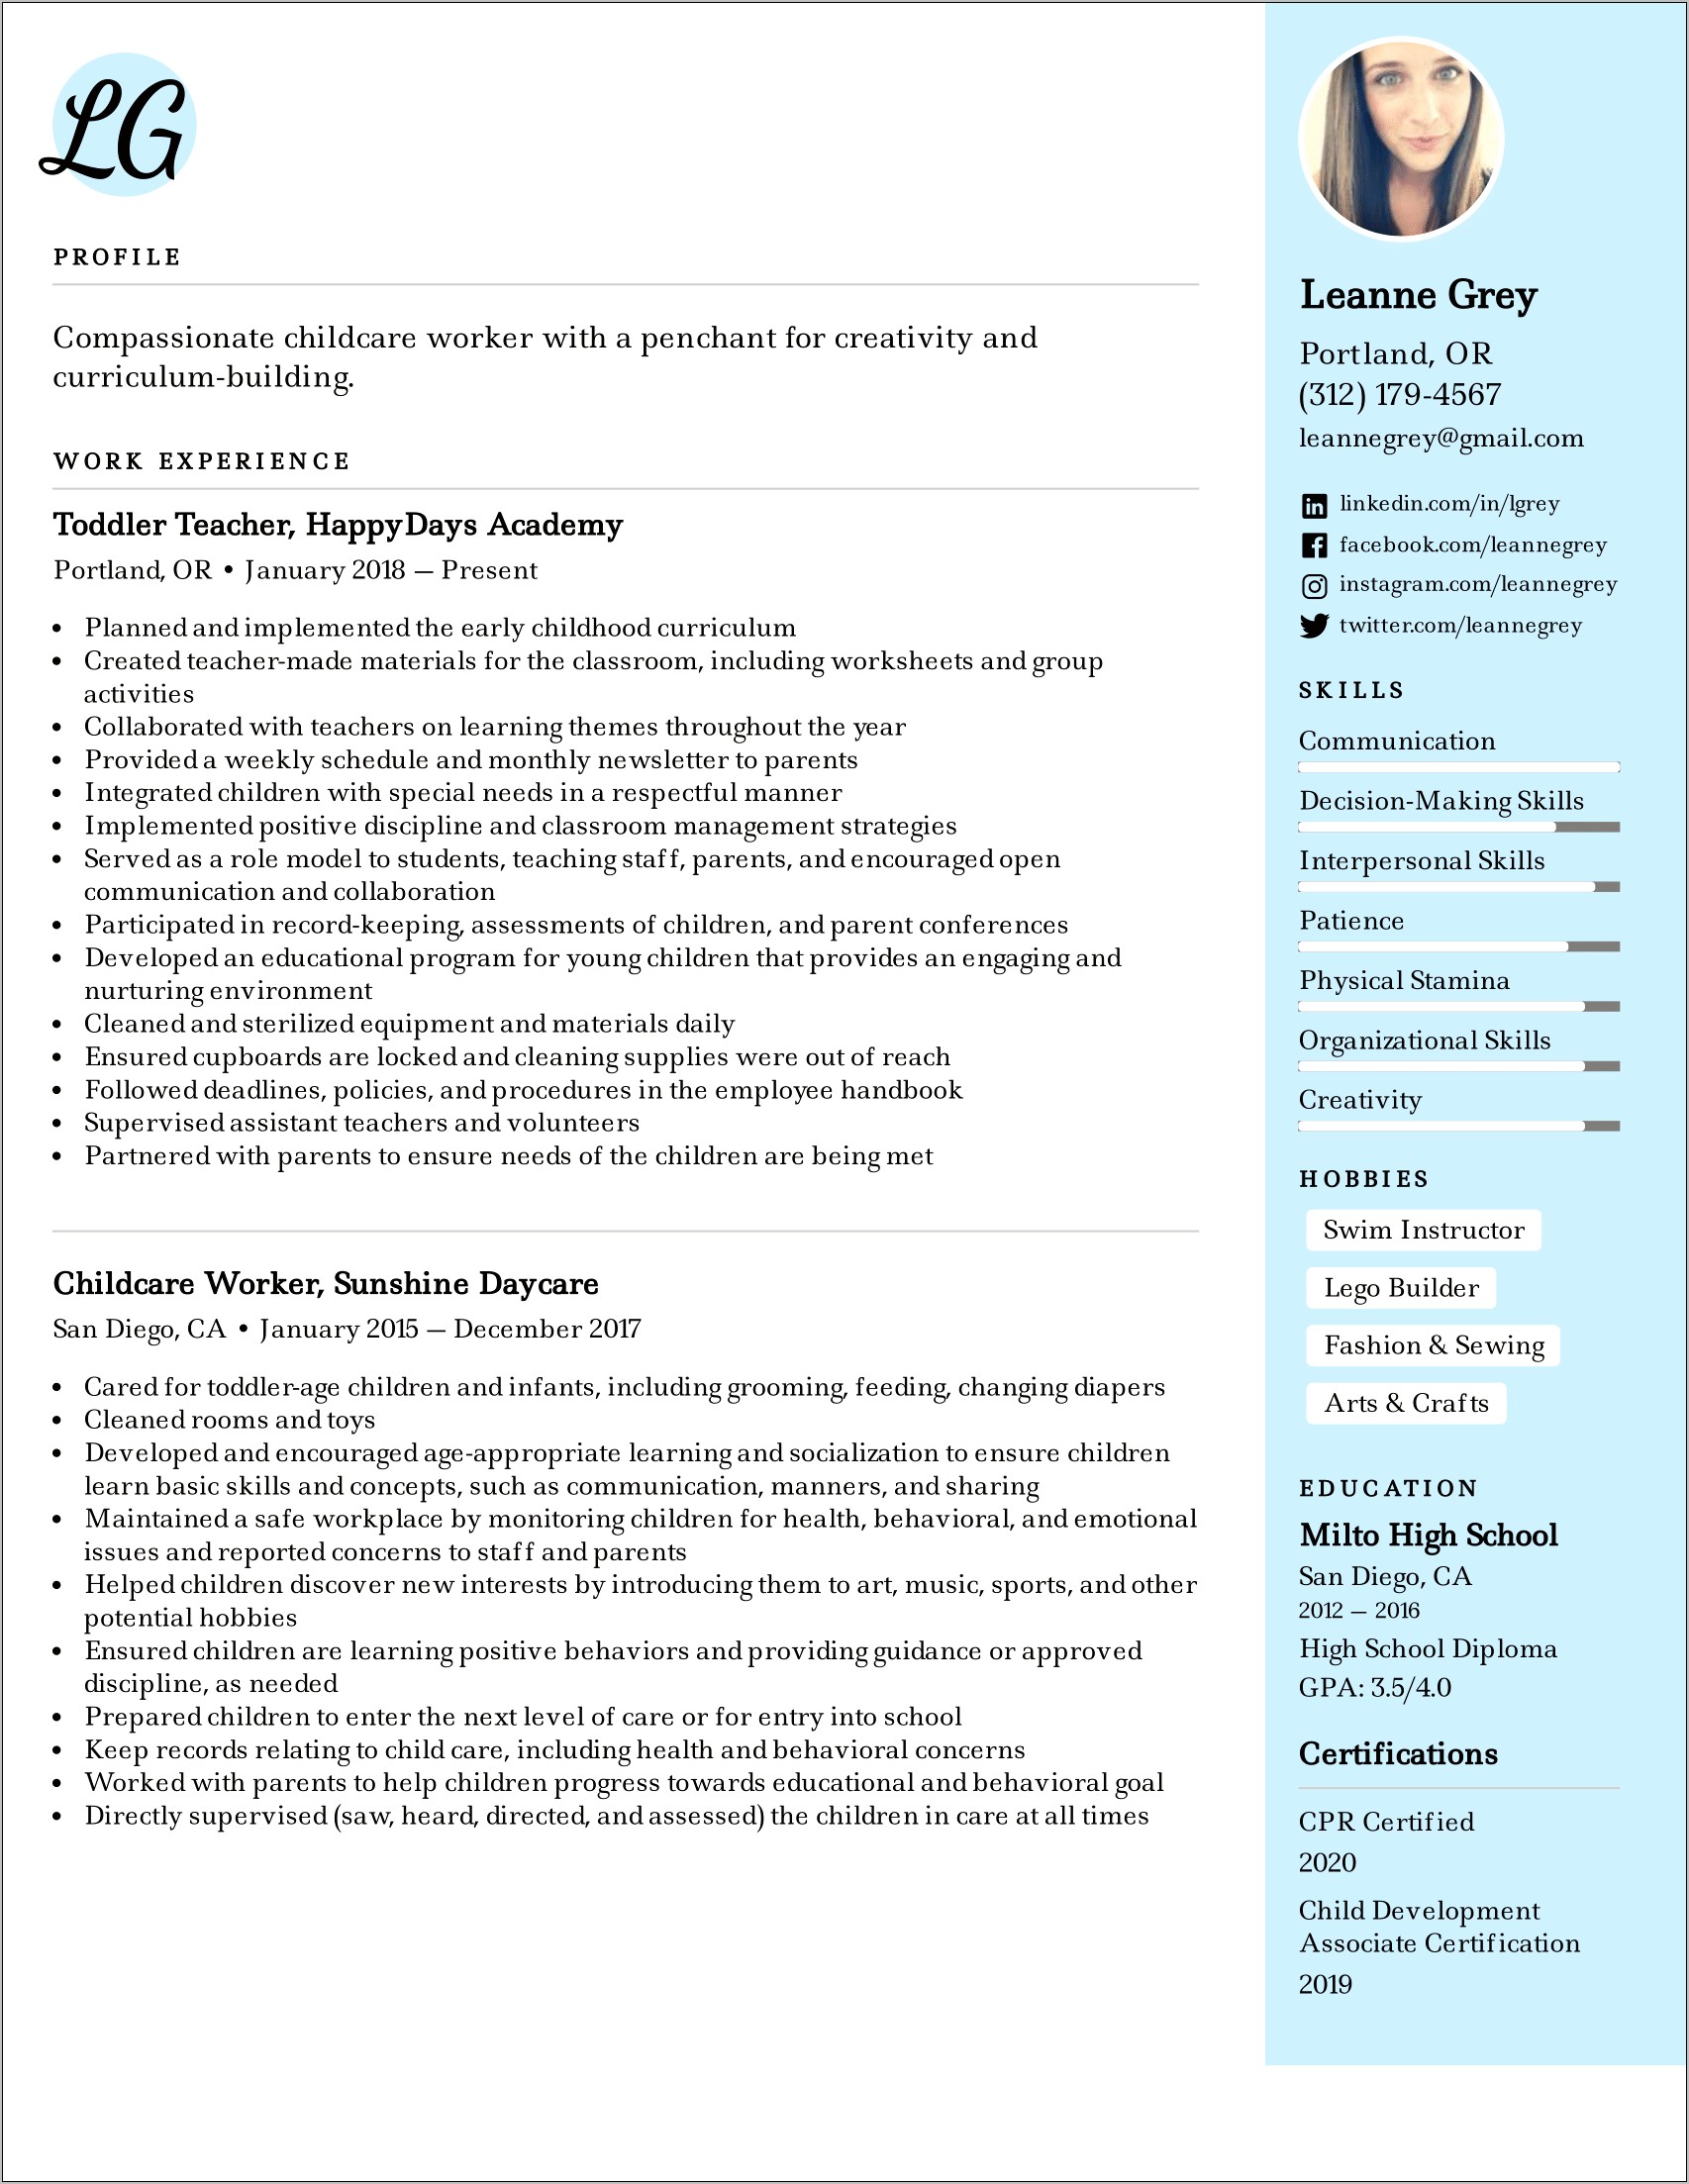 Resume Job Duties For Daycare Attendant